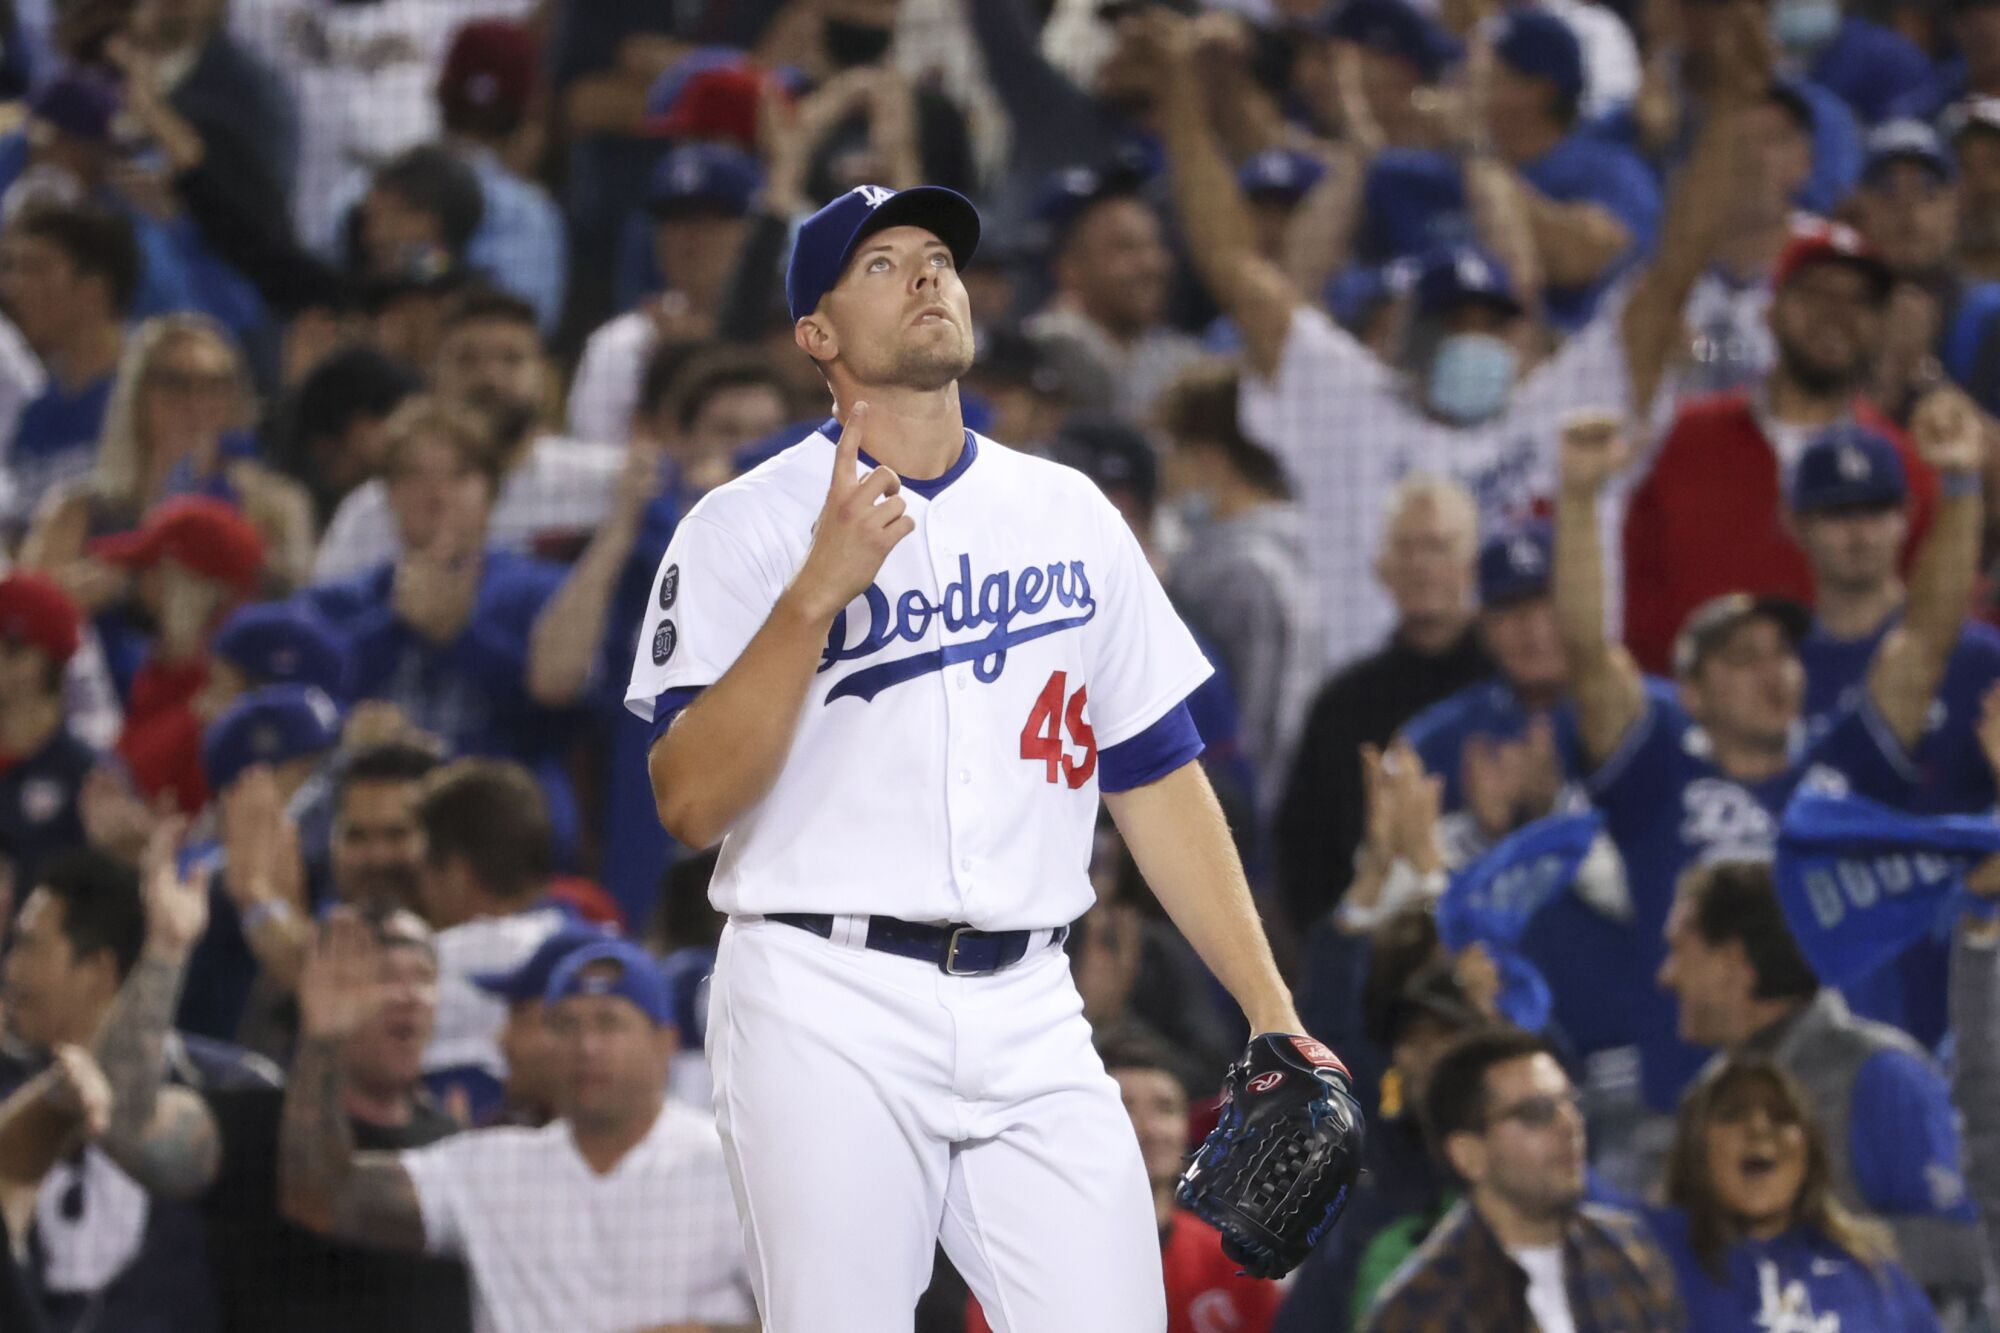 Dodgers reliever Blake Treinen points to the sky after retiring the side in the 2021 postseason.